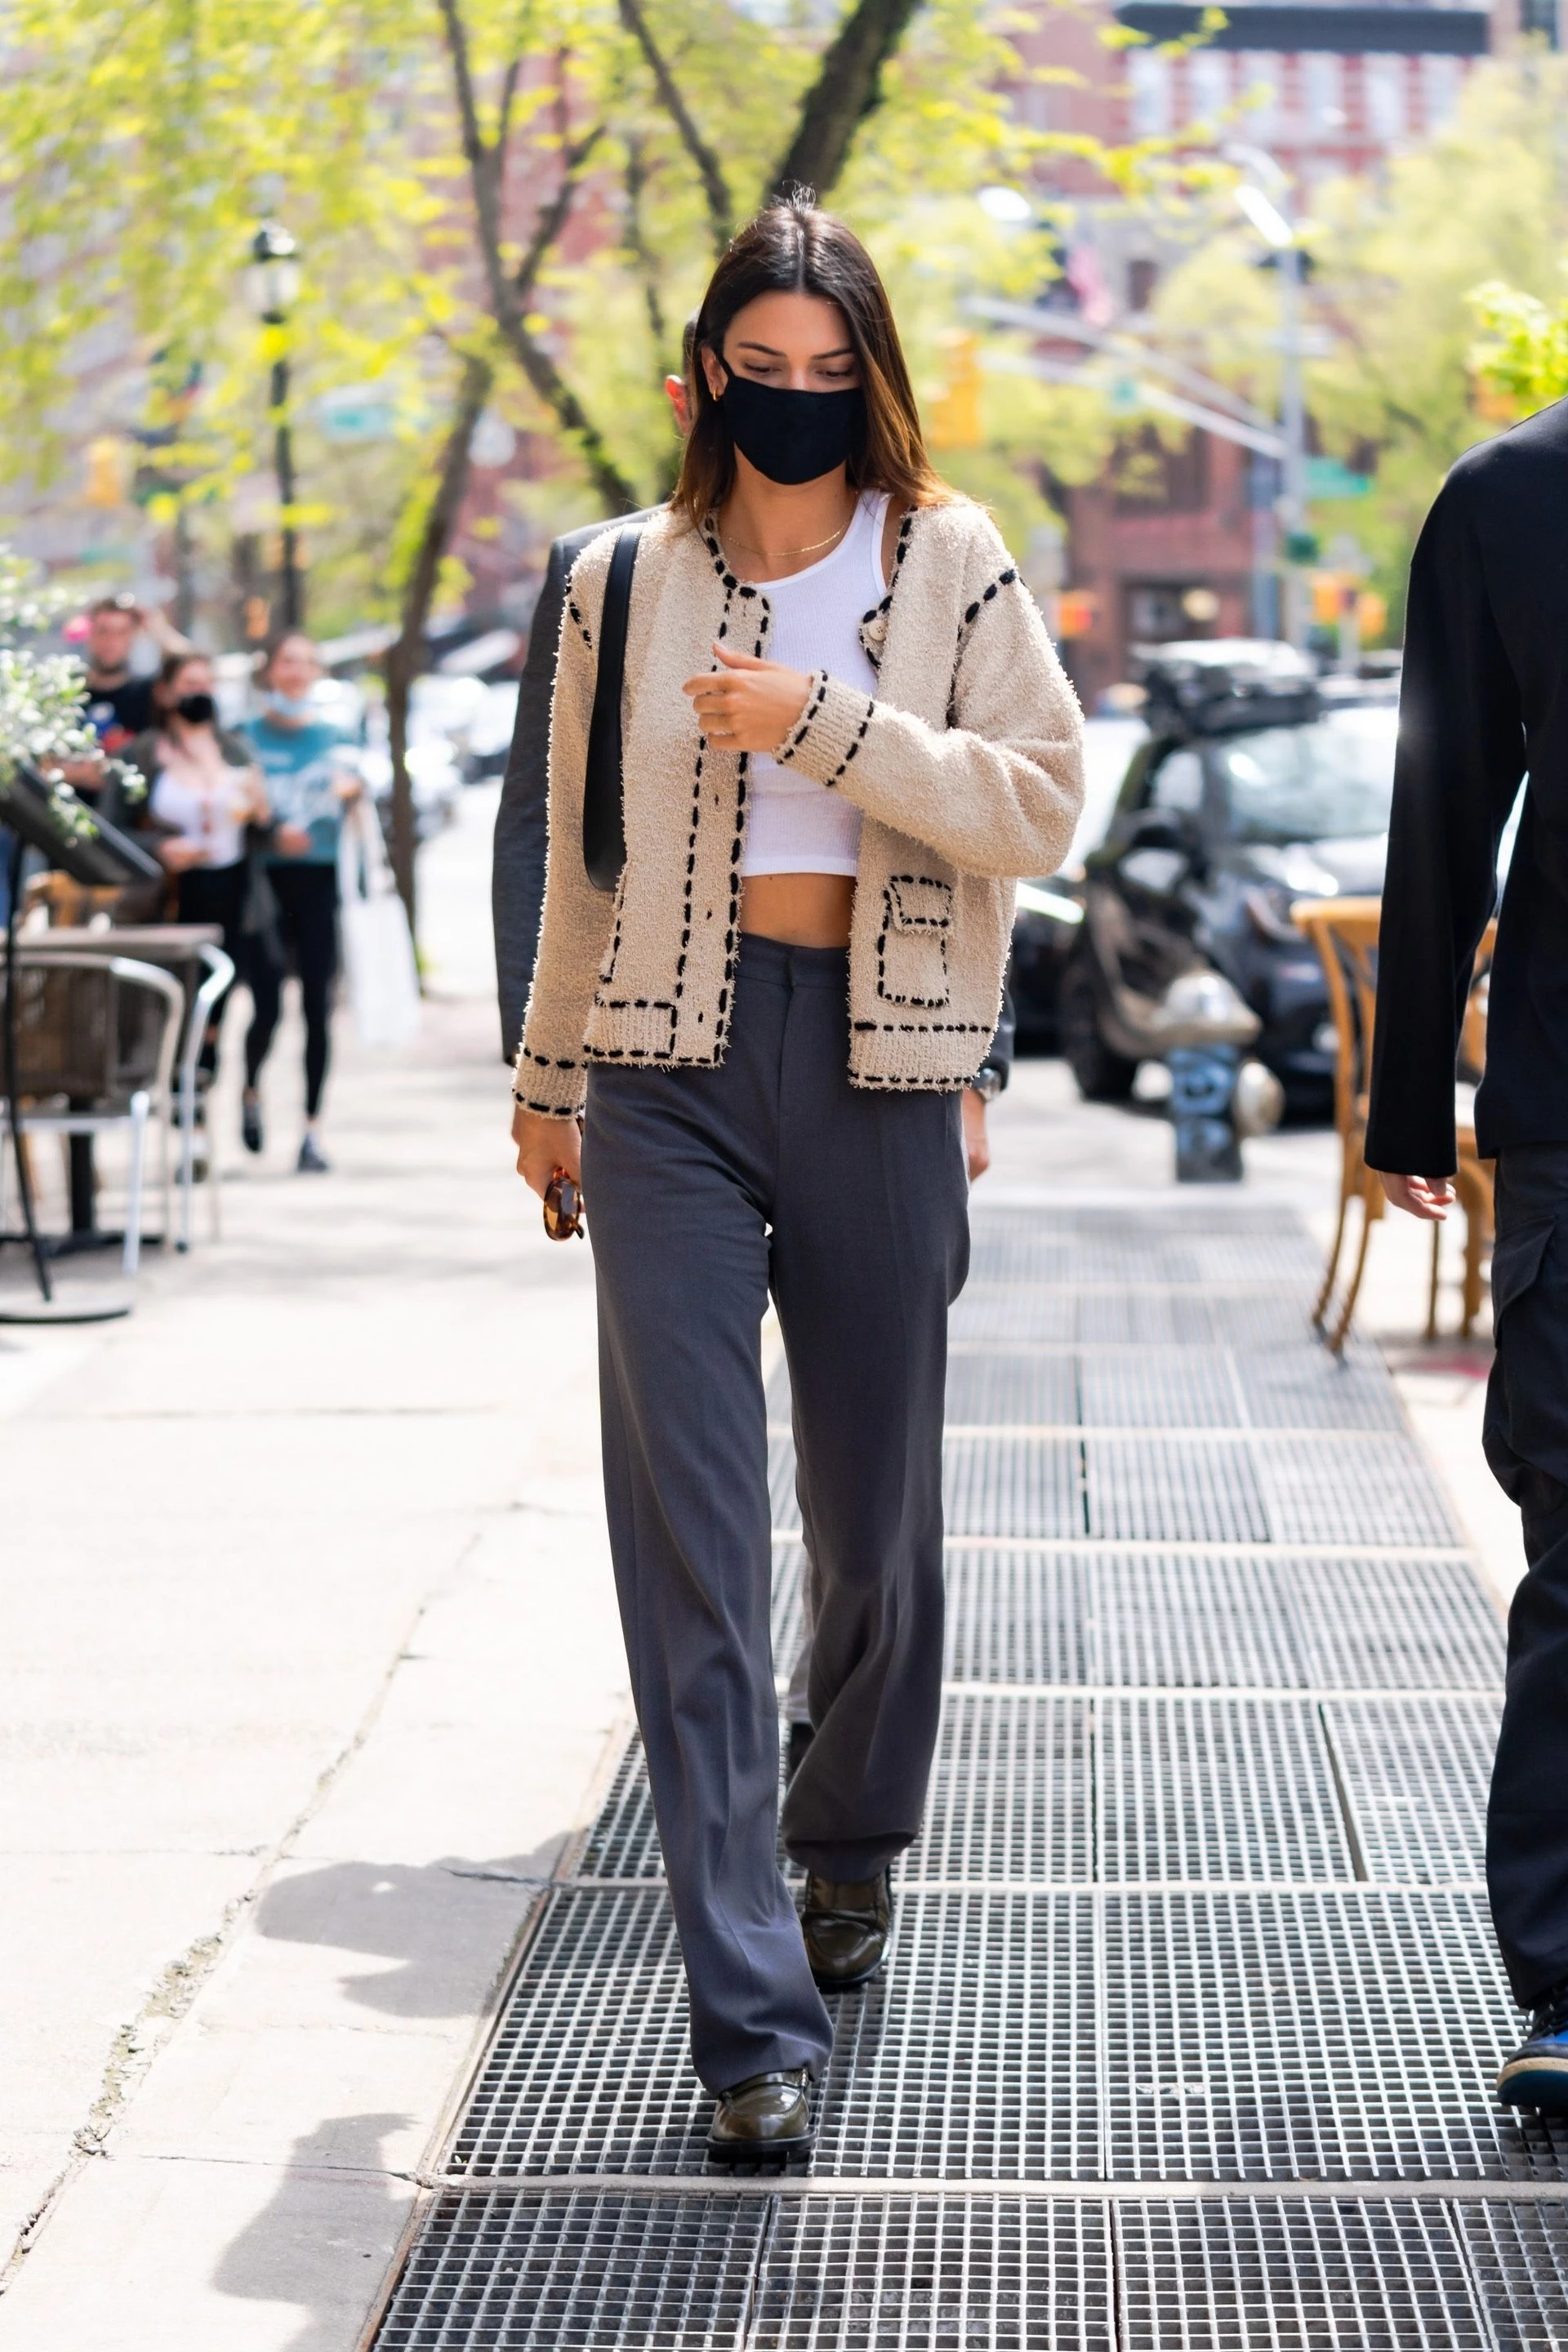 Kendall Jenner's street style